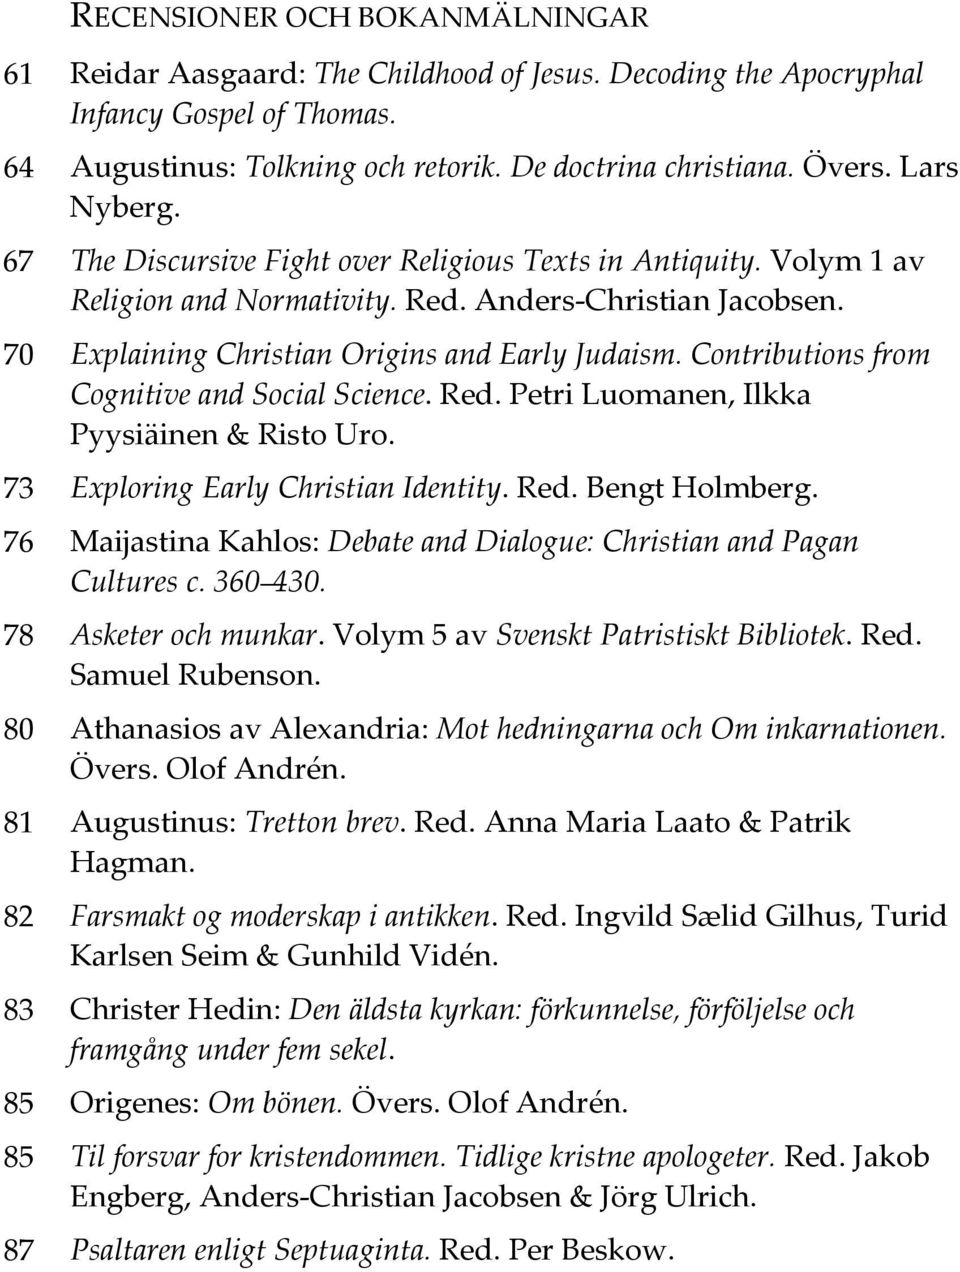 Contributions from Cognitive and Social Science. Red. Petri Luomanen, Ilkka Pyysiäinen & Risto Uro. 73 Exploring Early Christian Identity. Red. Bengt Holmberg.